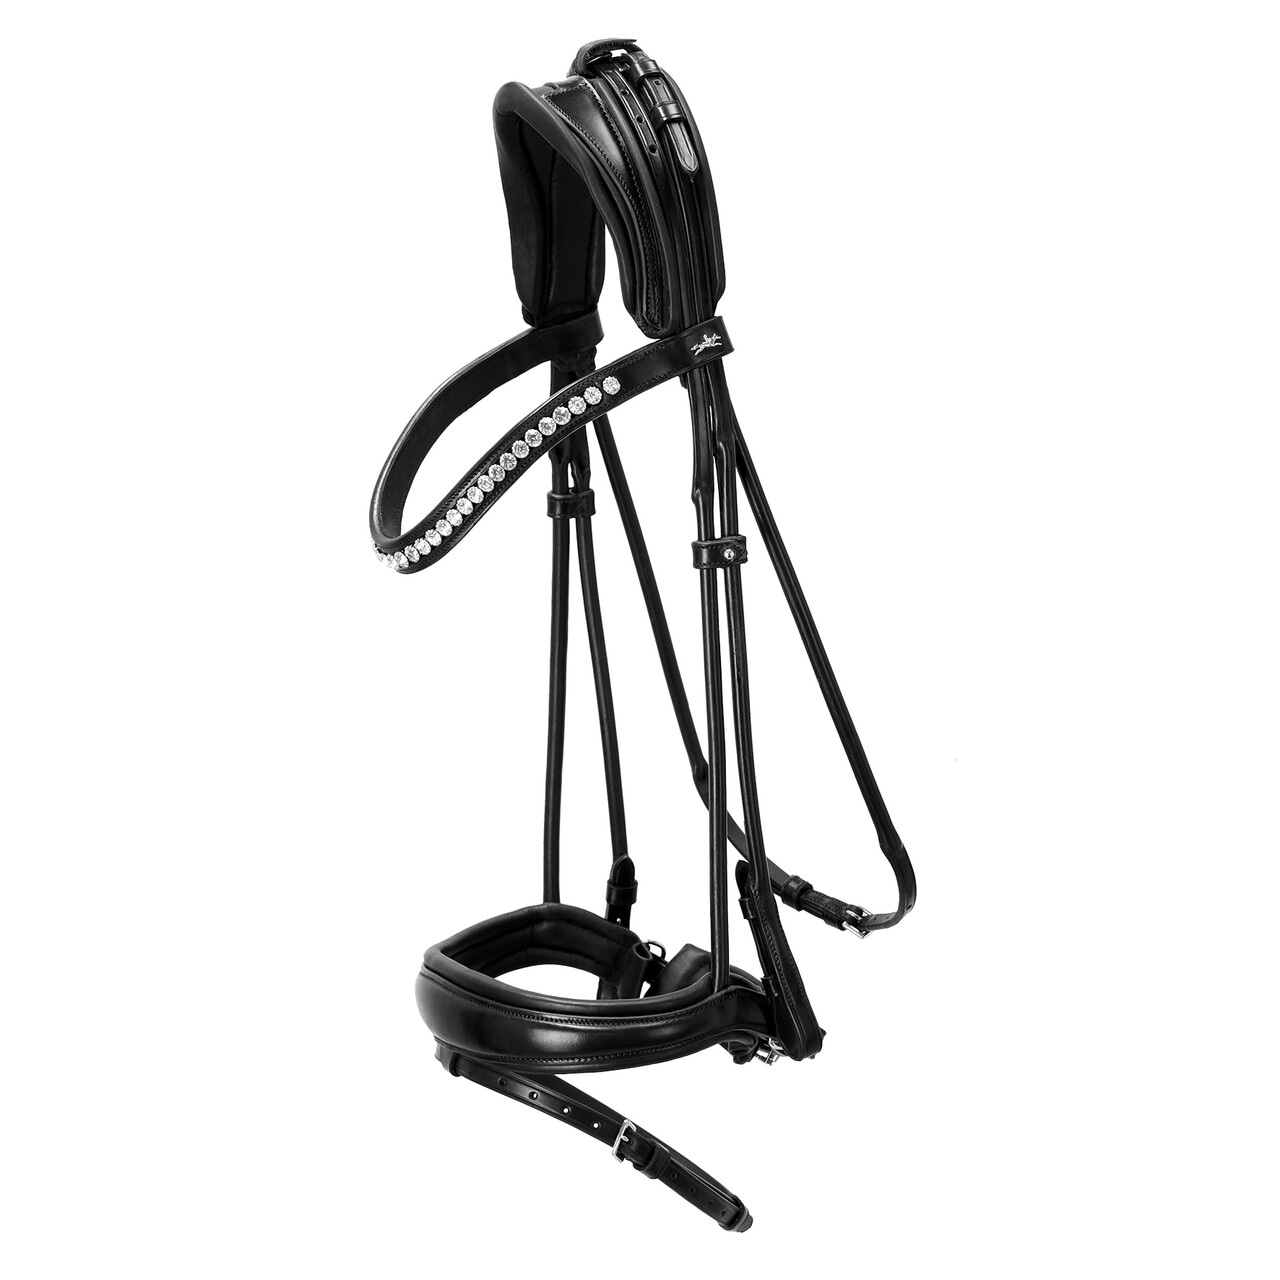 Round sewn bridle Westminster - Black